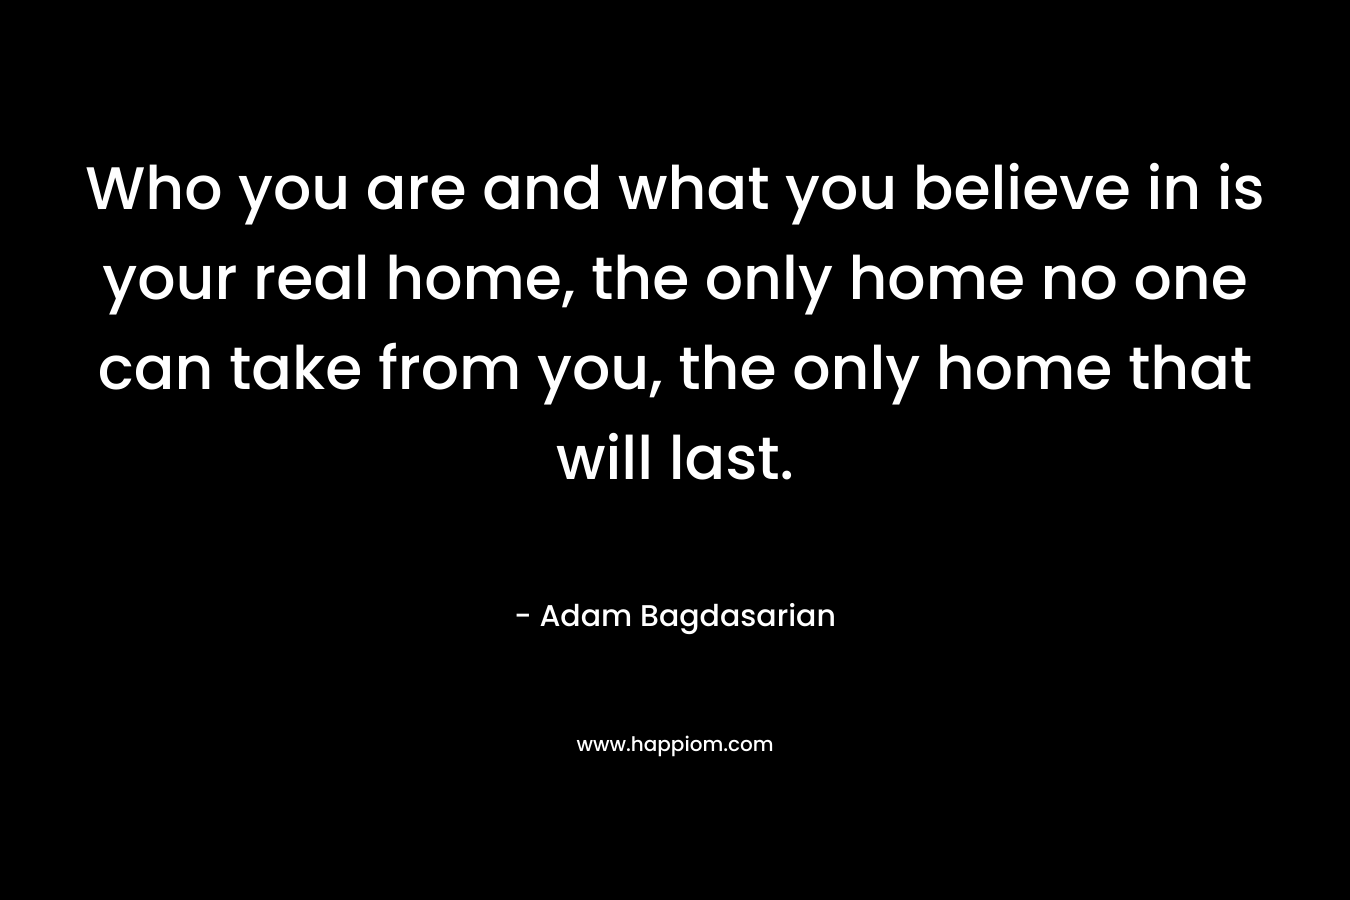 Who you are and what you believe in is your real home, the only home no one can take from you, the only home that will last.